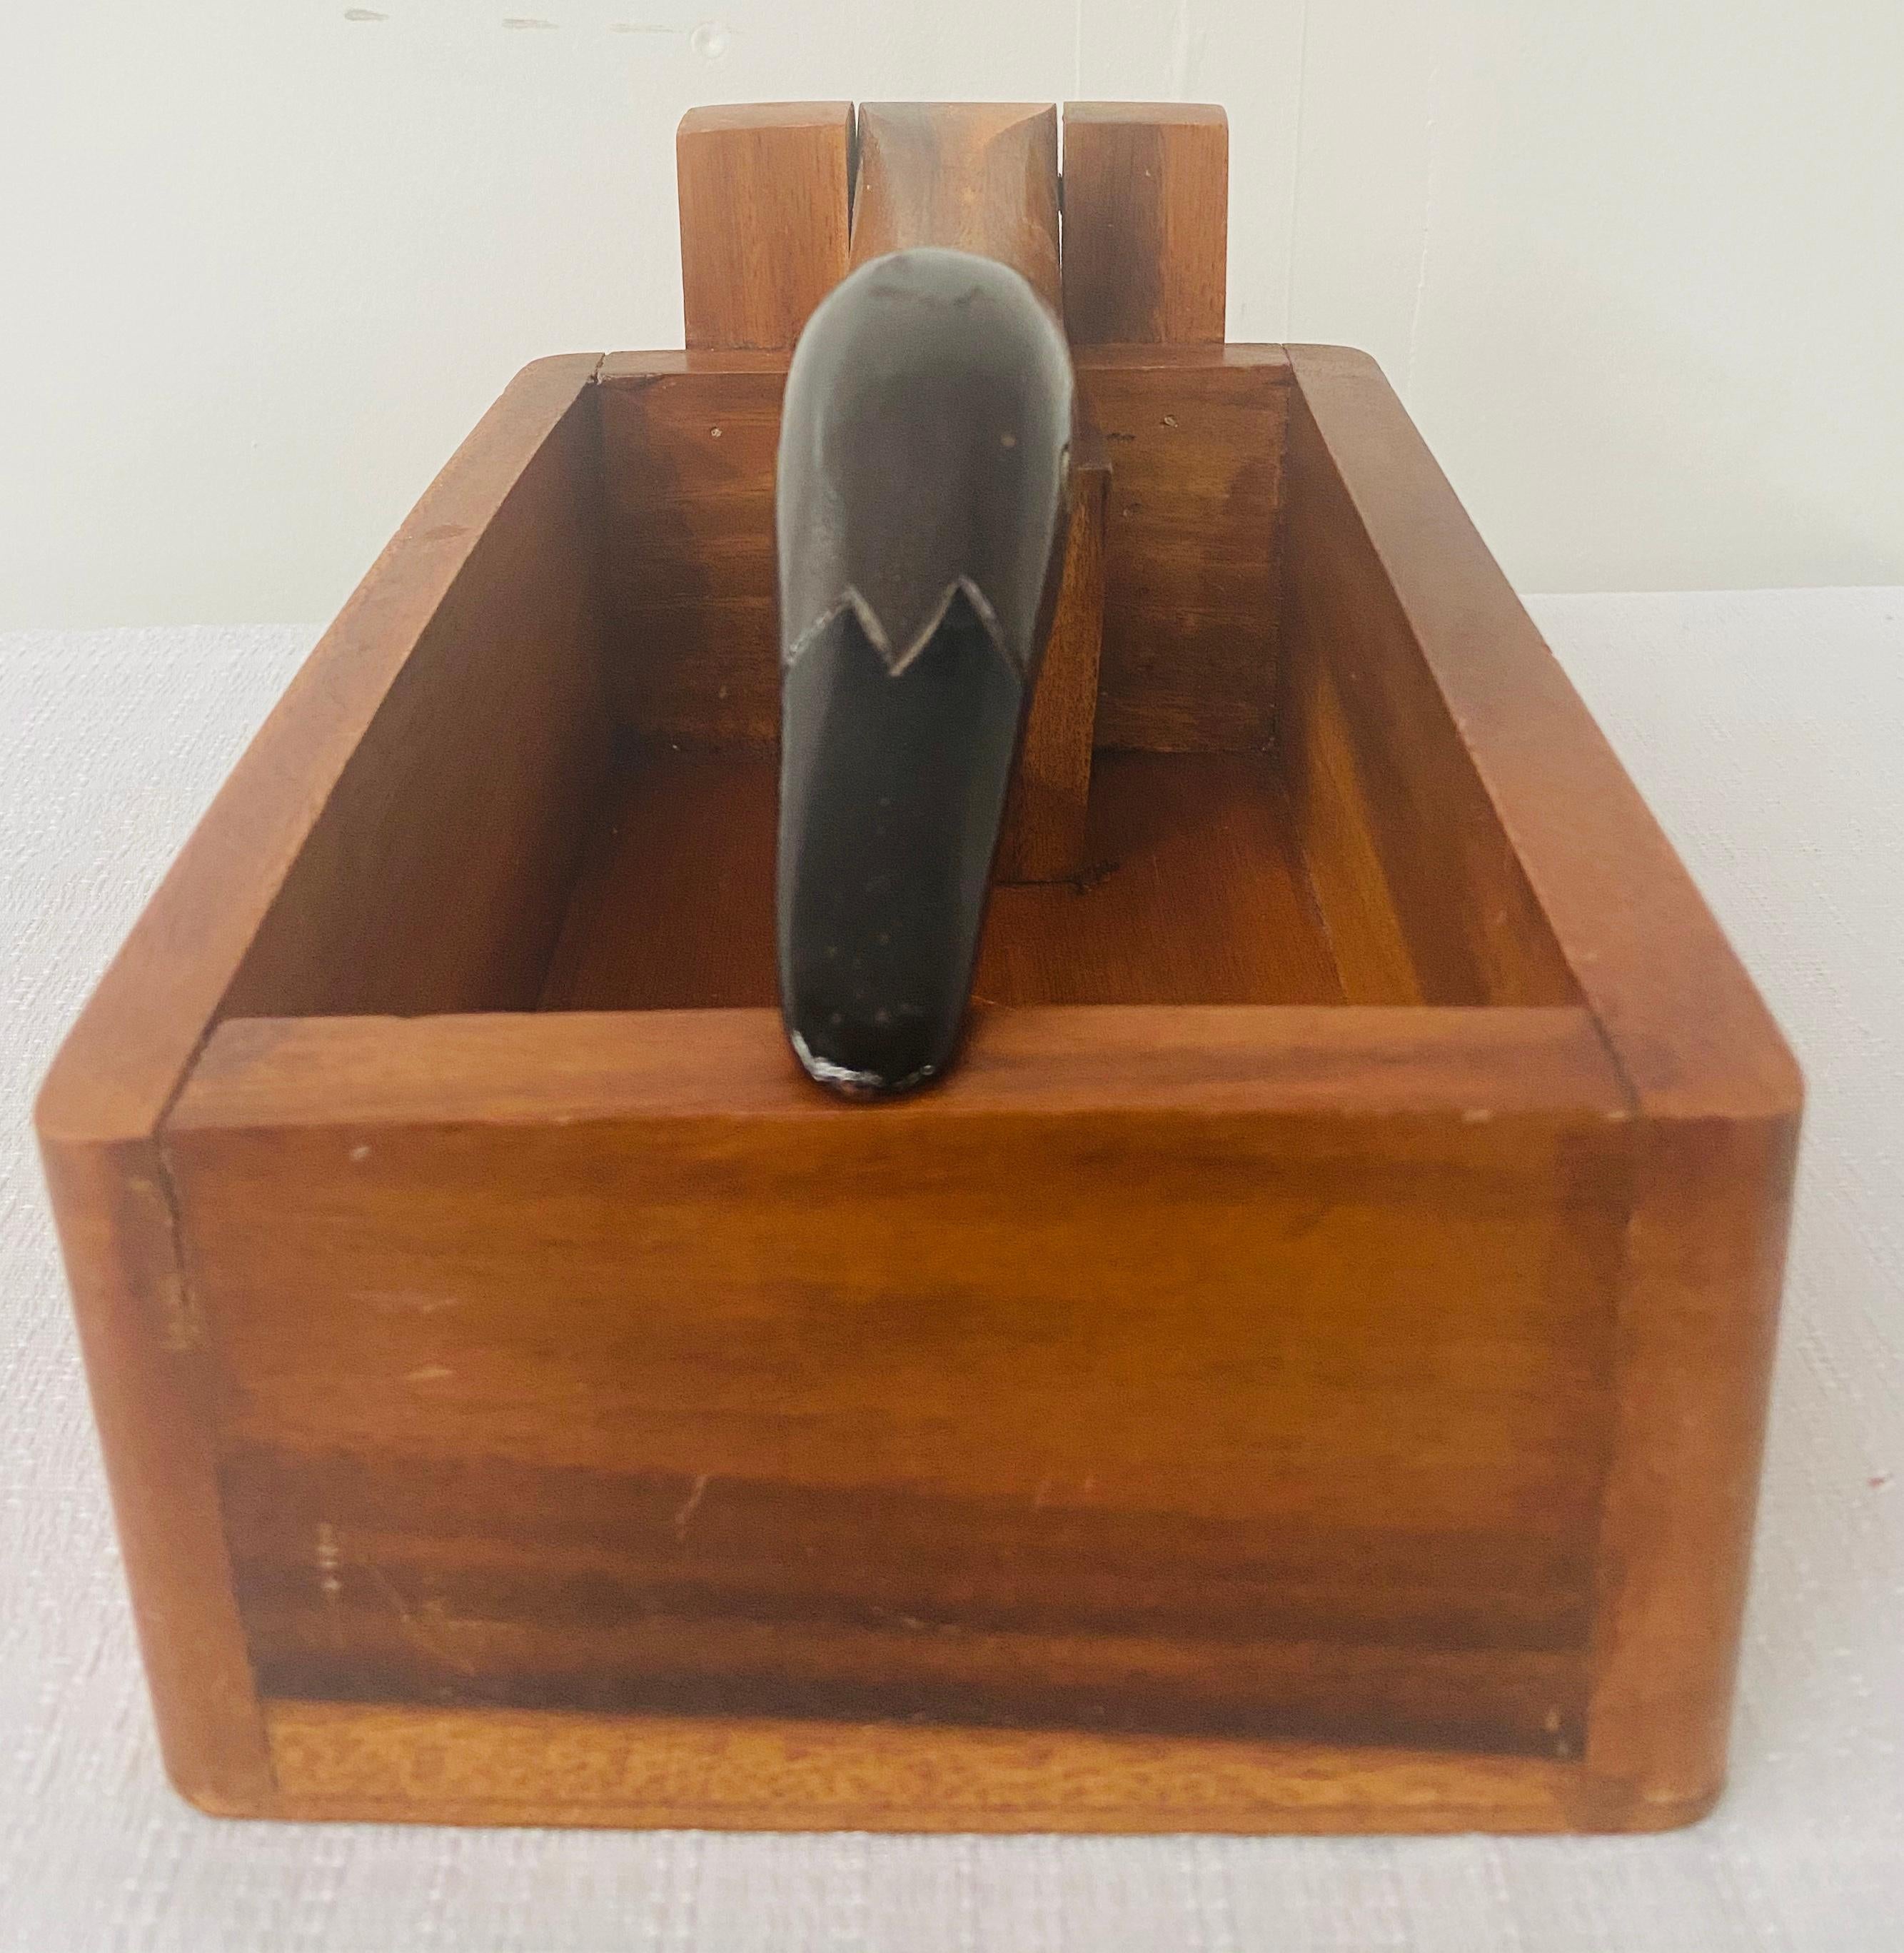 A vintage wooden nut cracker bird box made of walnut from 1980s.

Dimensions: 10.5